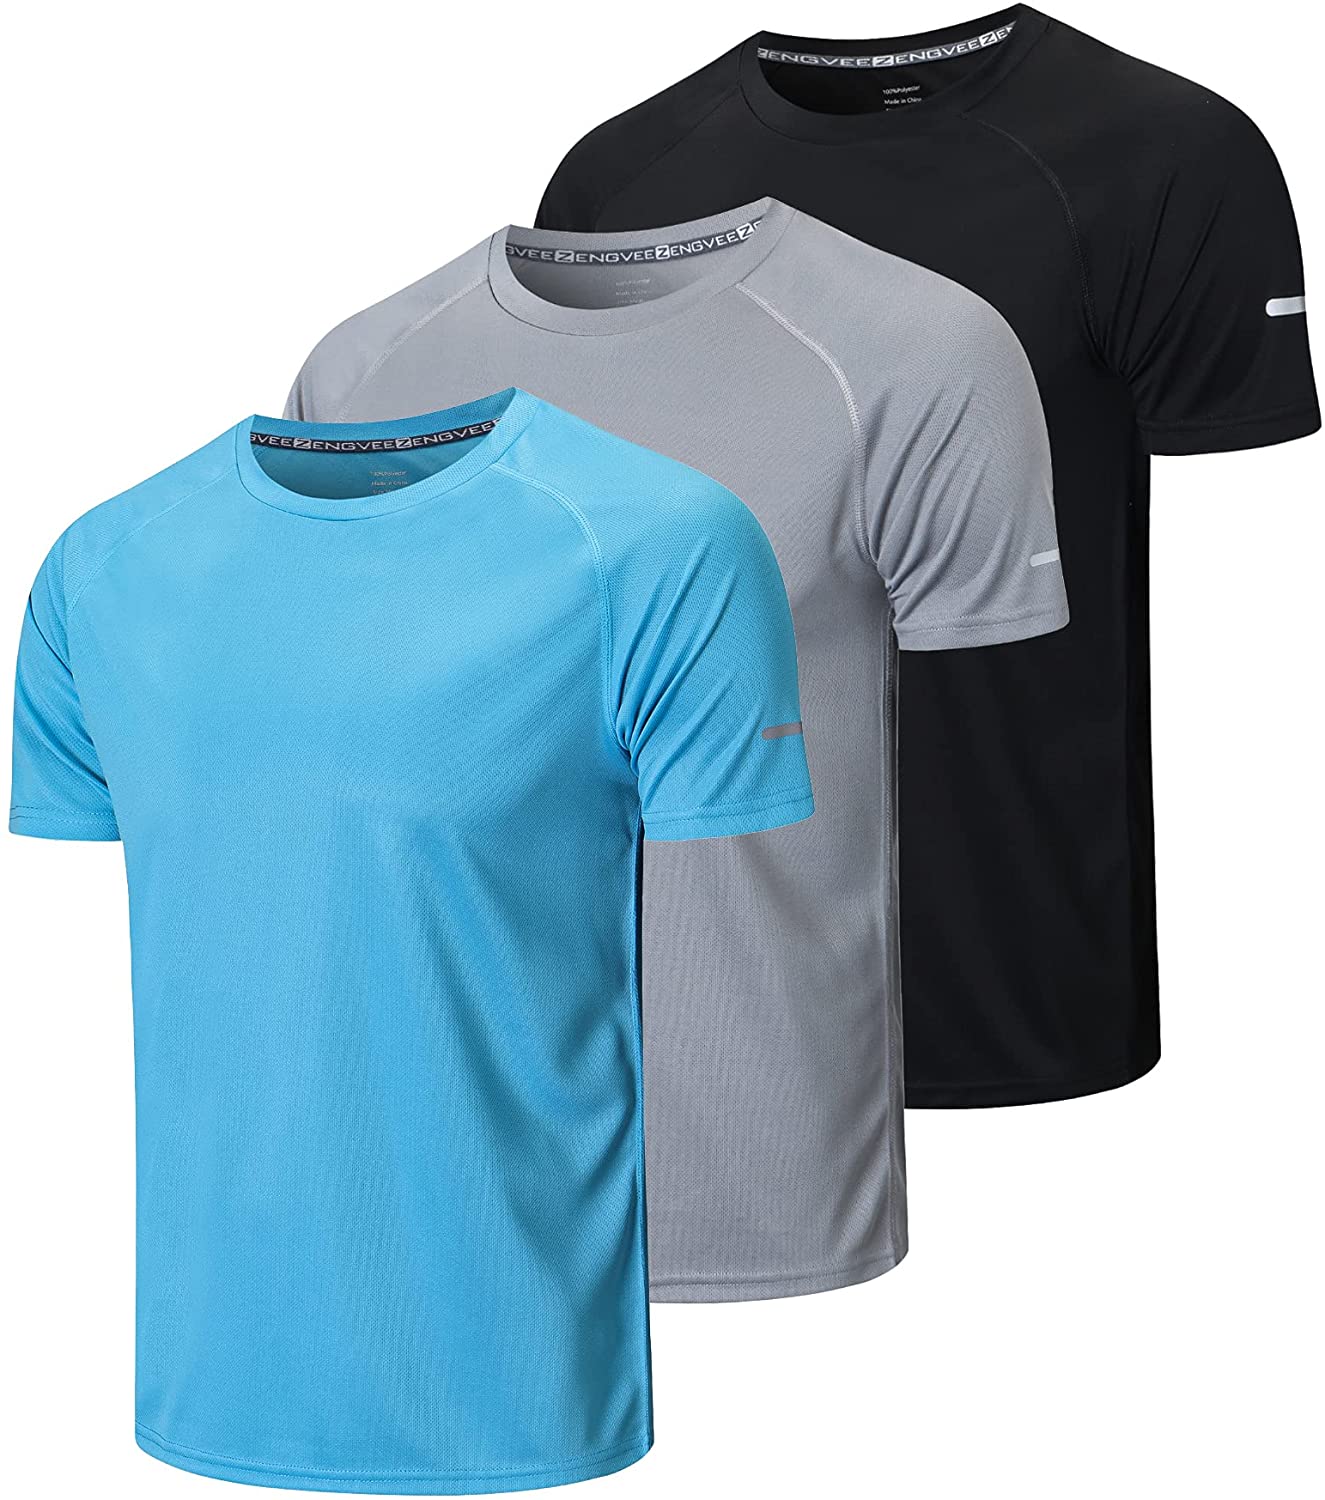 Men's 3 Pack Workout Dry Fit Shirts 04